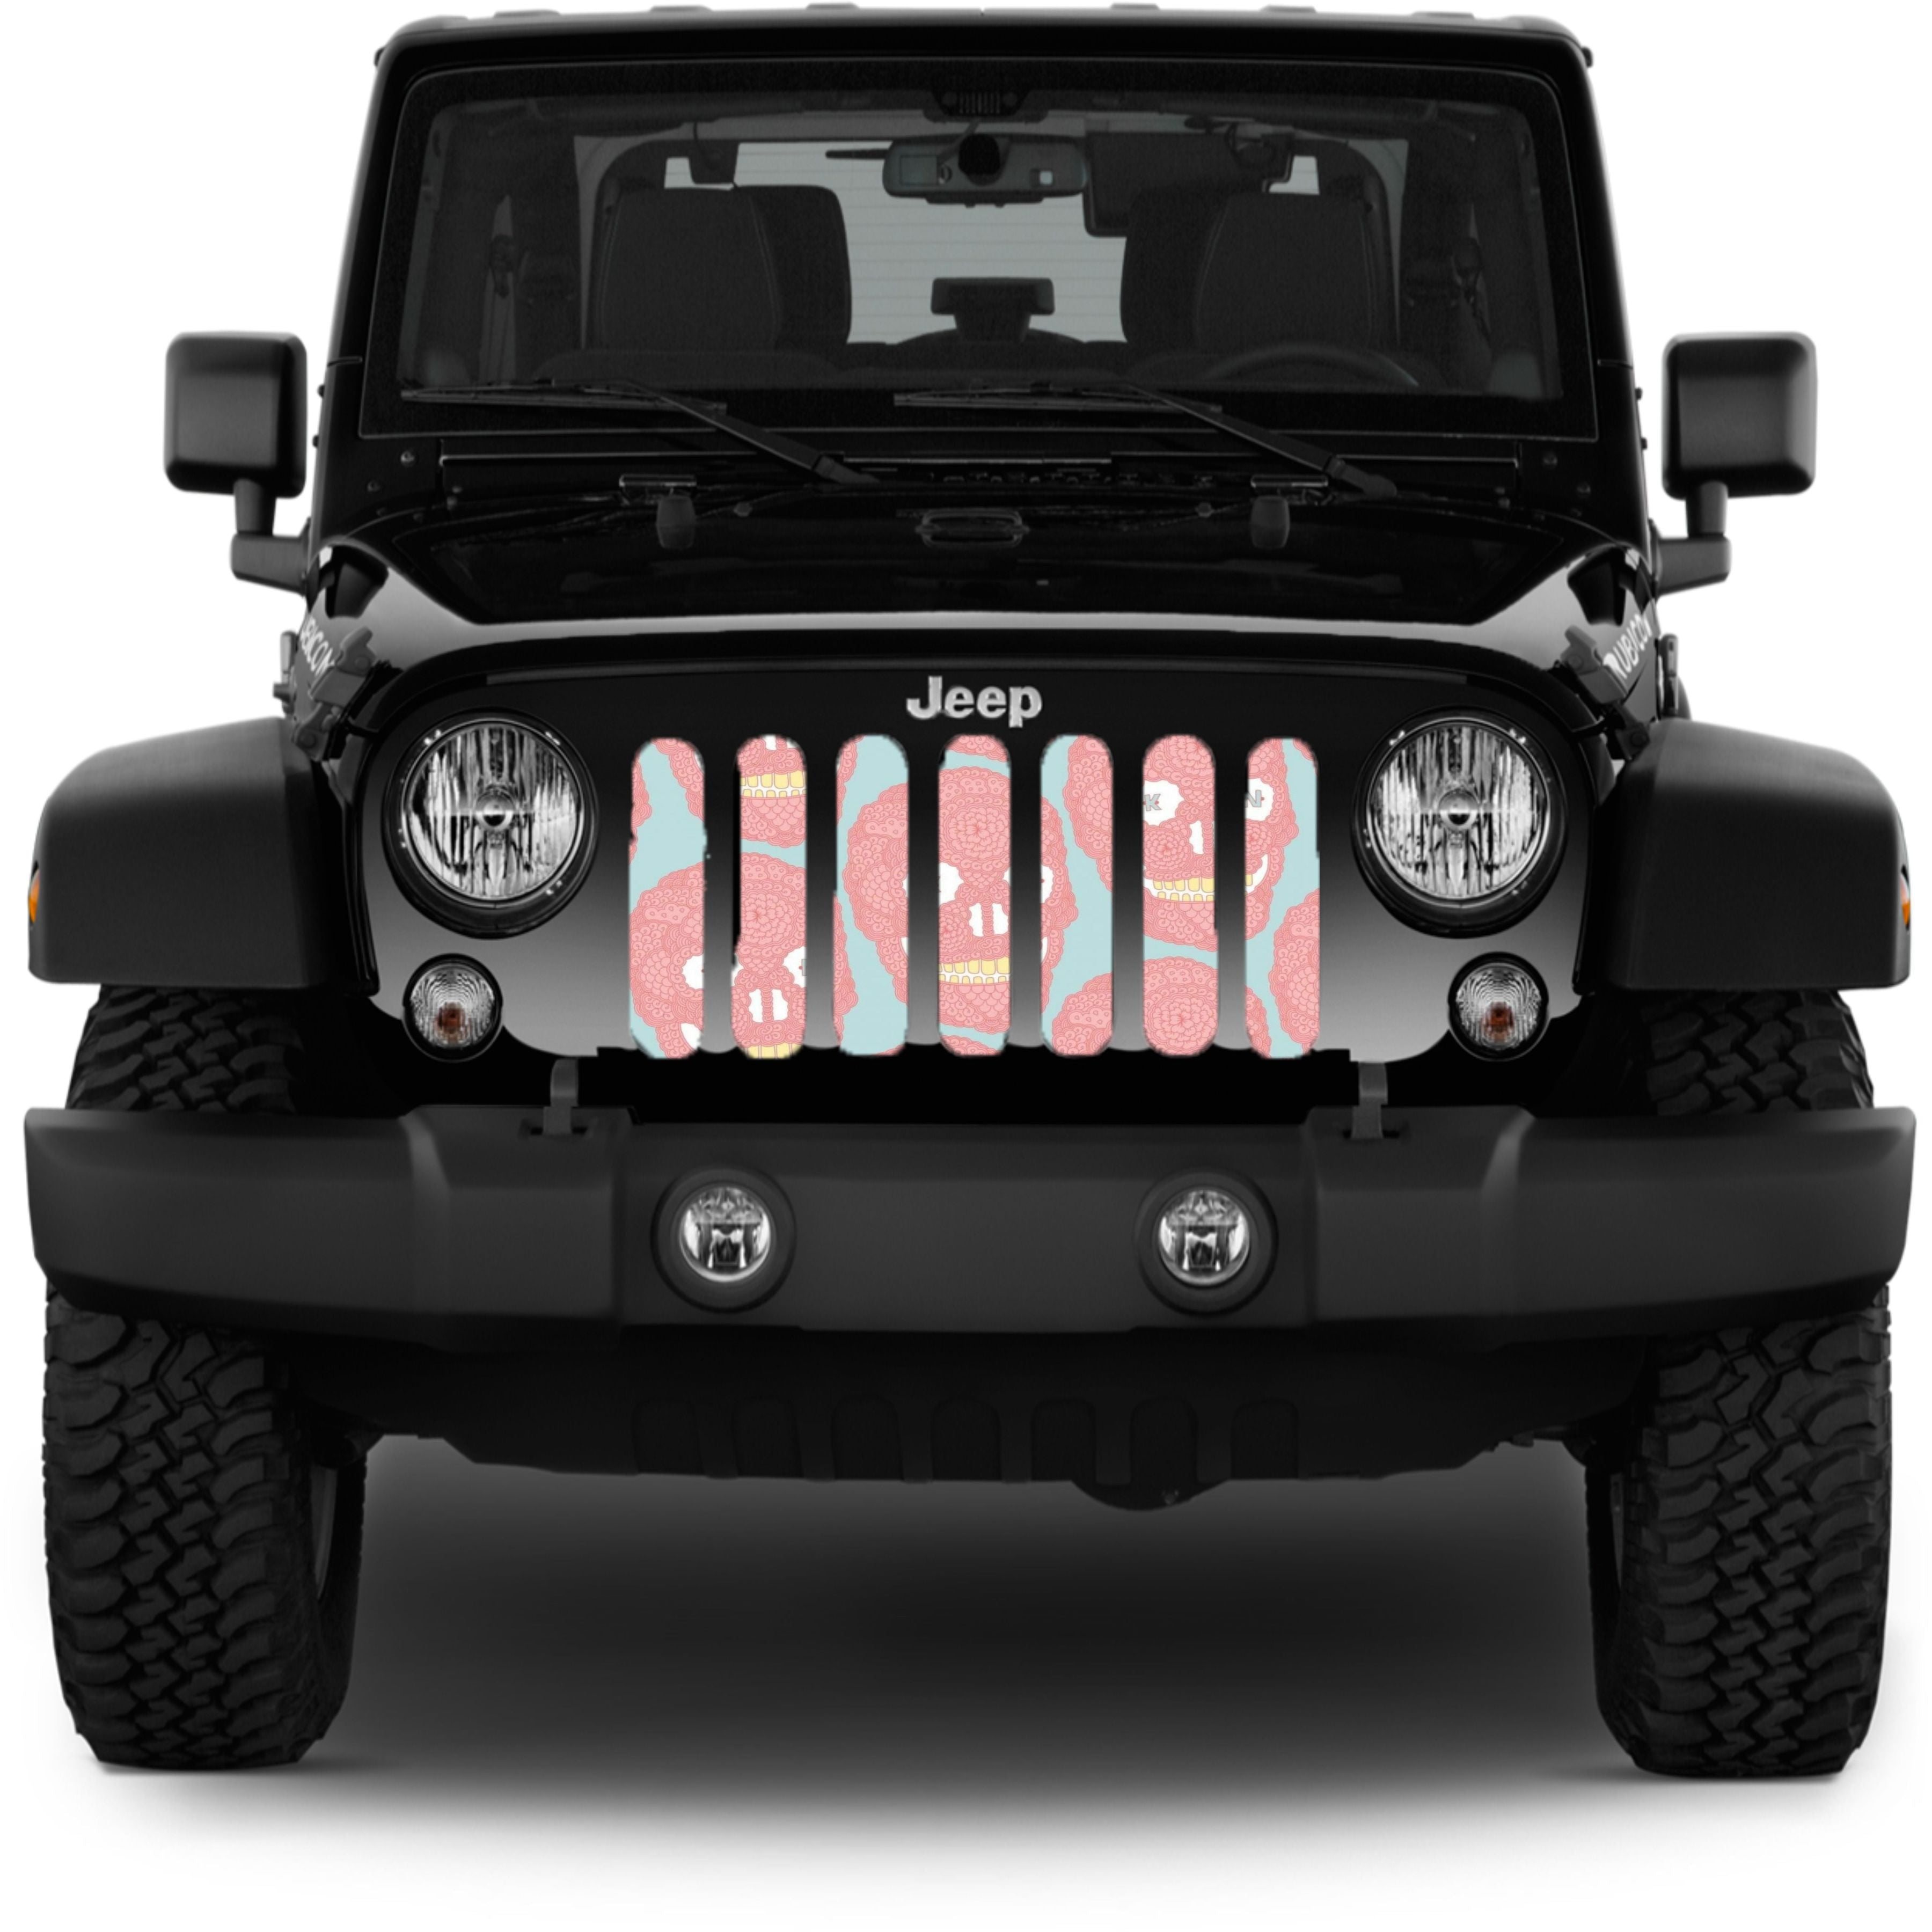 Unique pink mandala sugar skull pattern for your mesh grille insert for Jeep. 